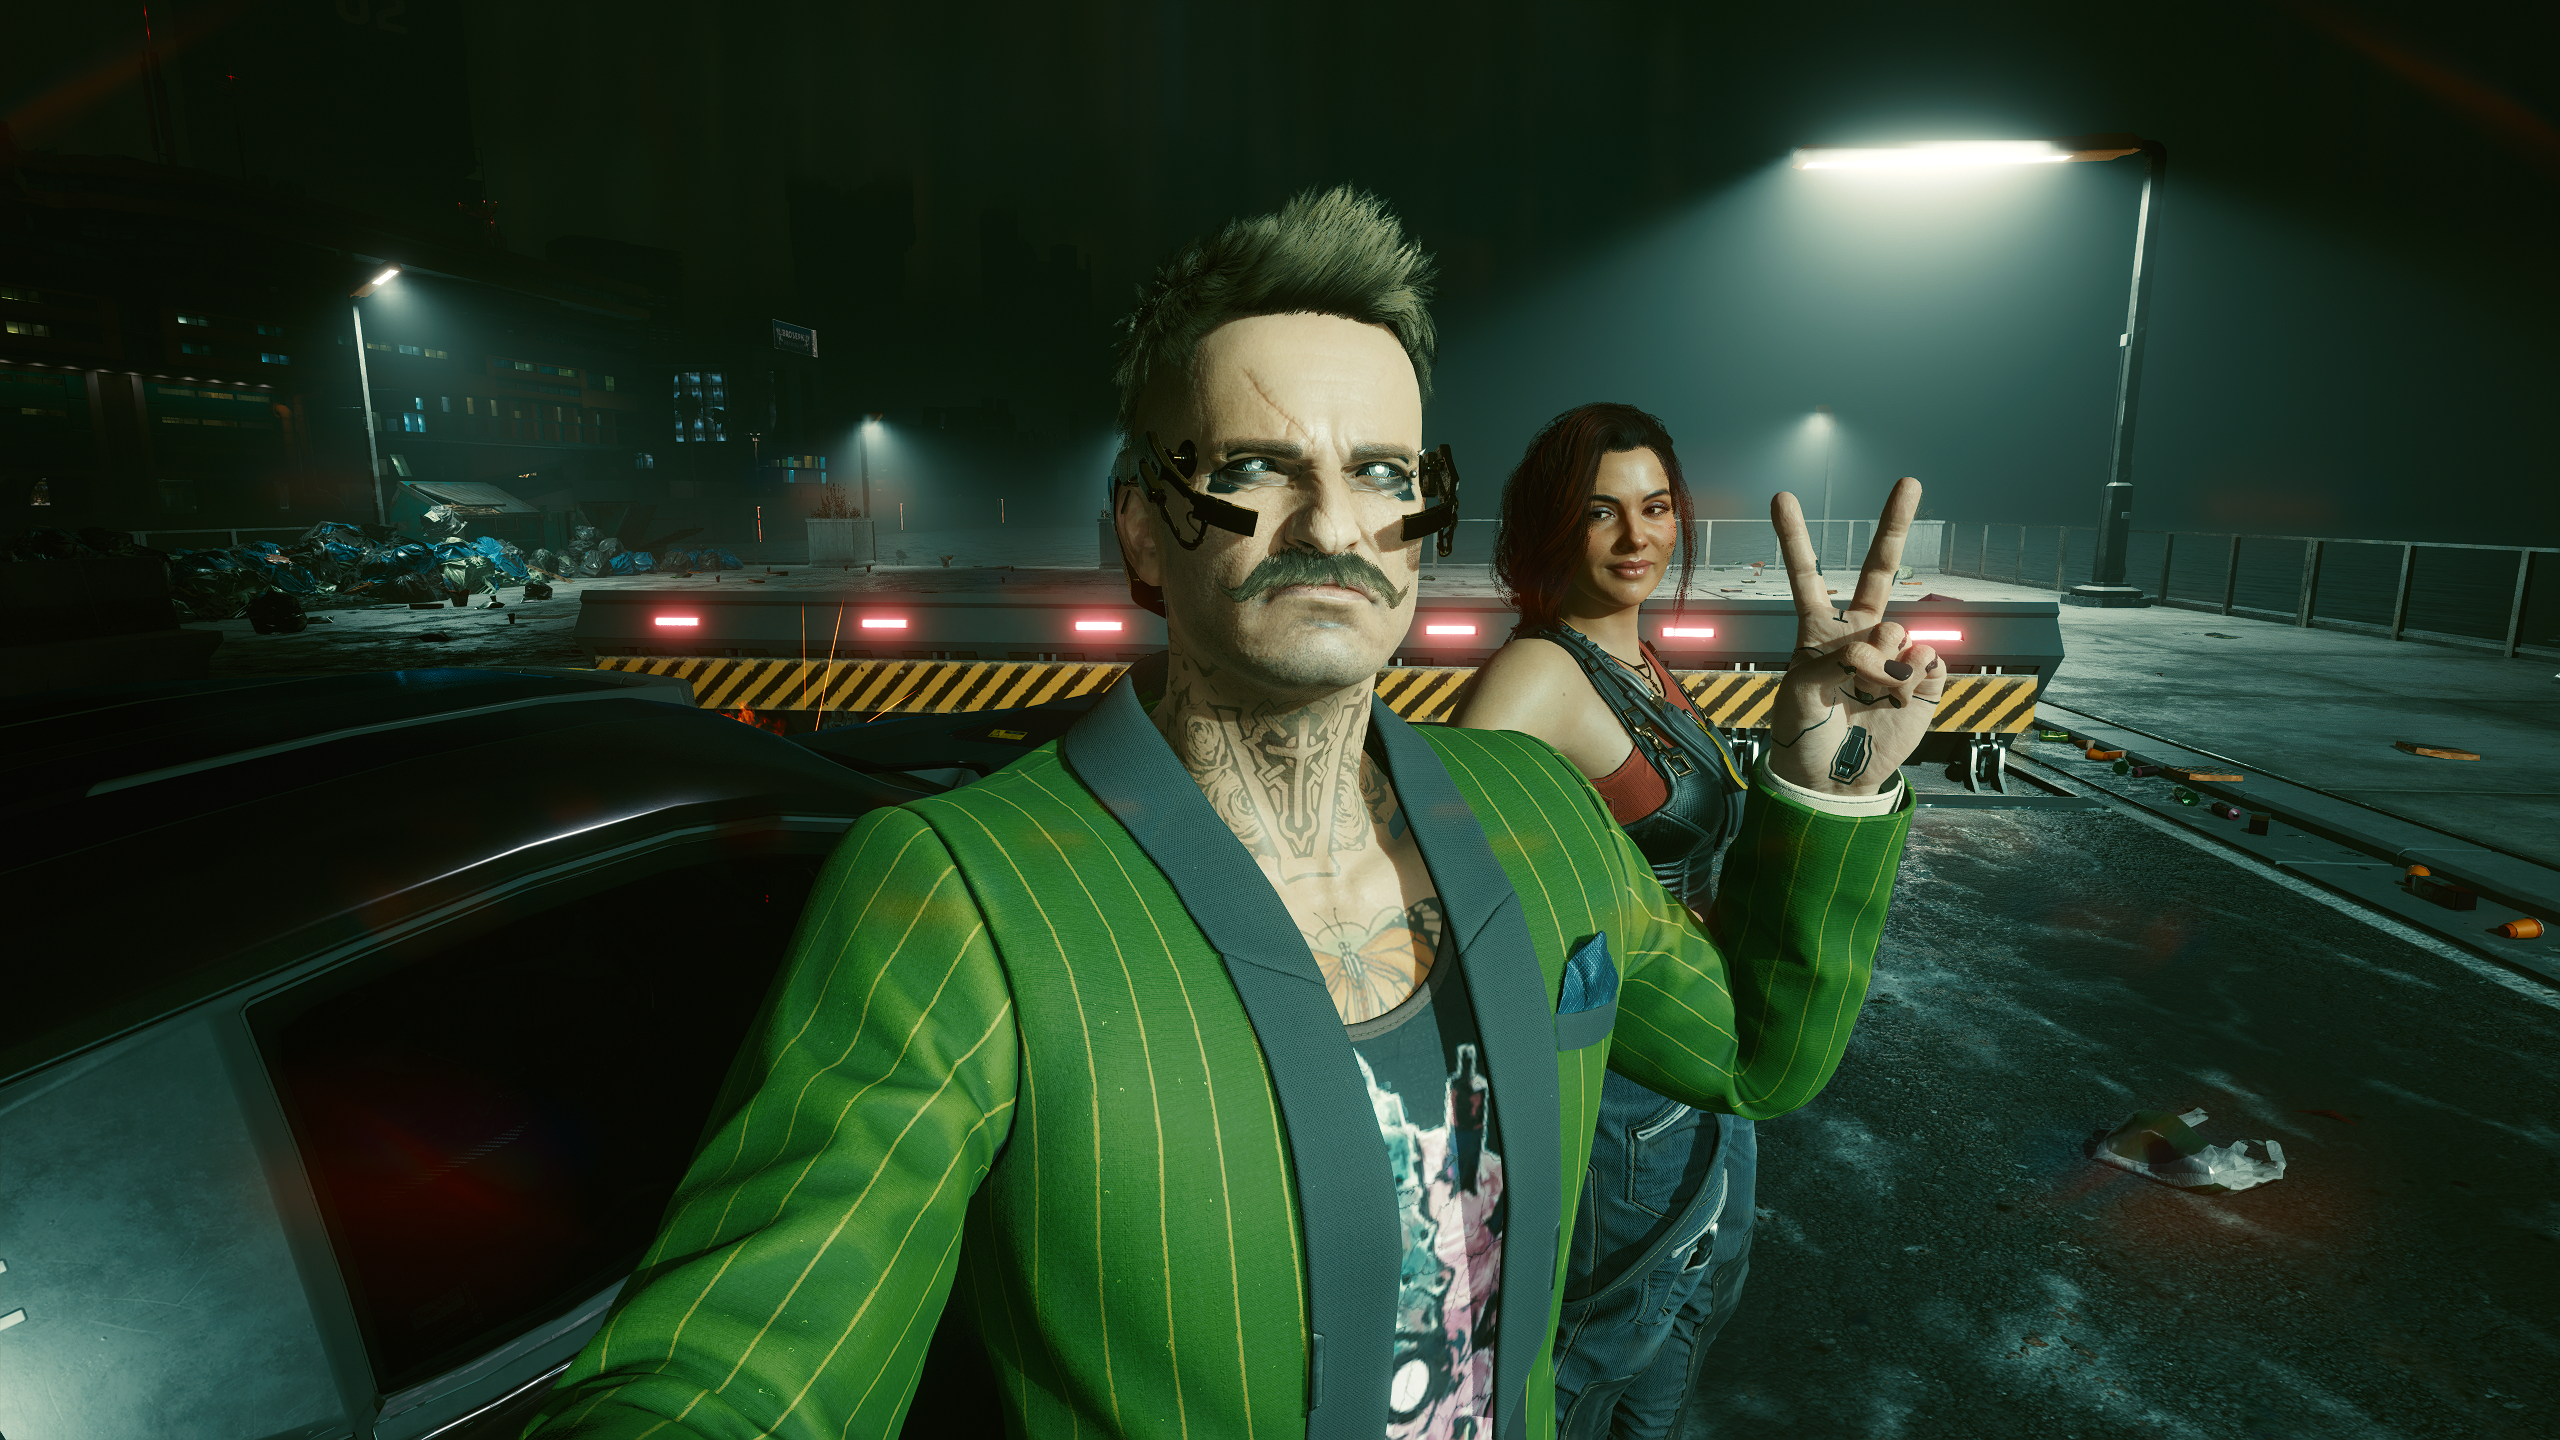 General 2560x1440 cyberpunk Cyberpunk 2077 peace sign video games CD Projekt RED video game characters